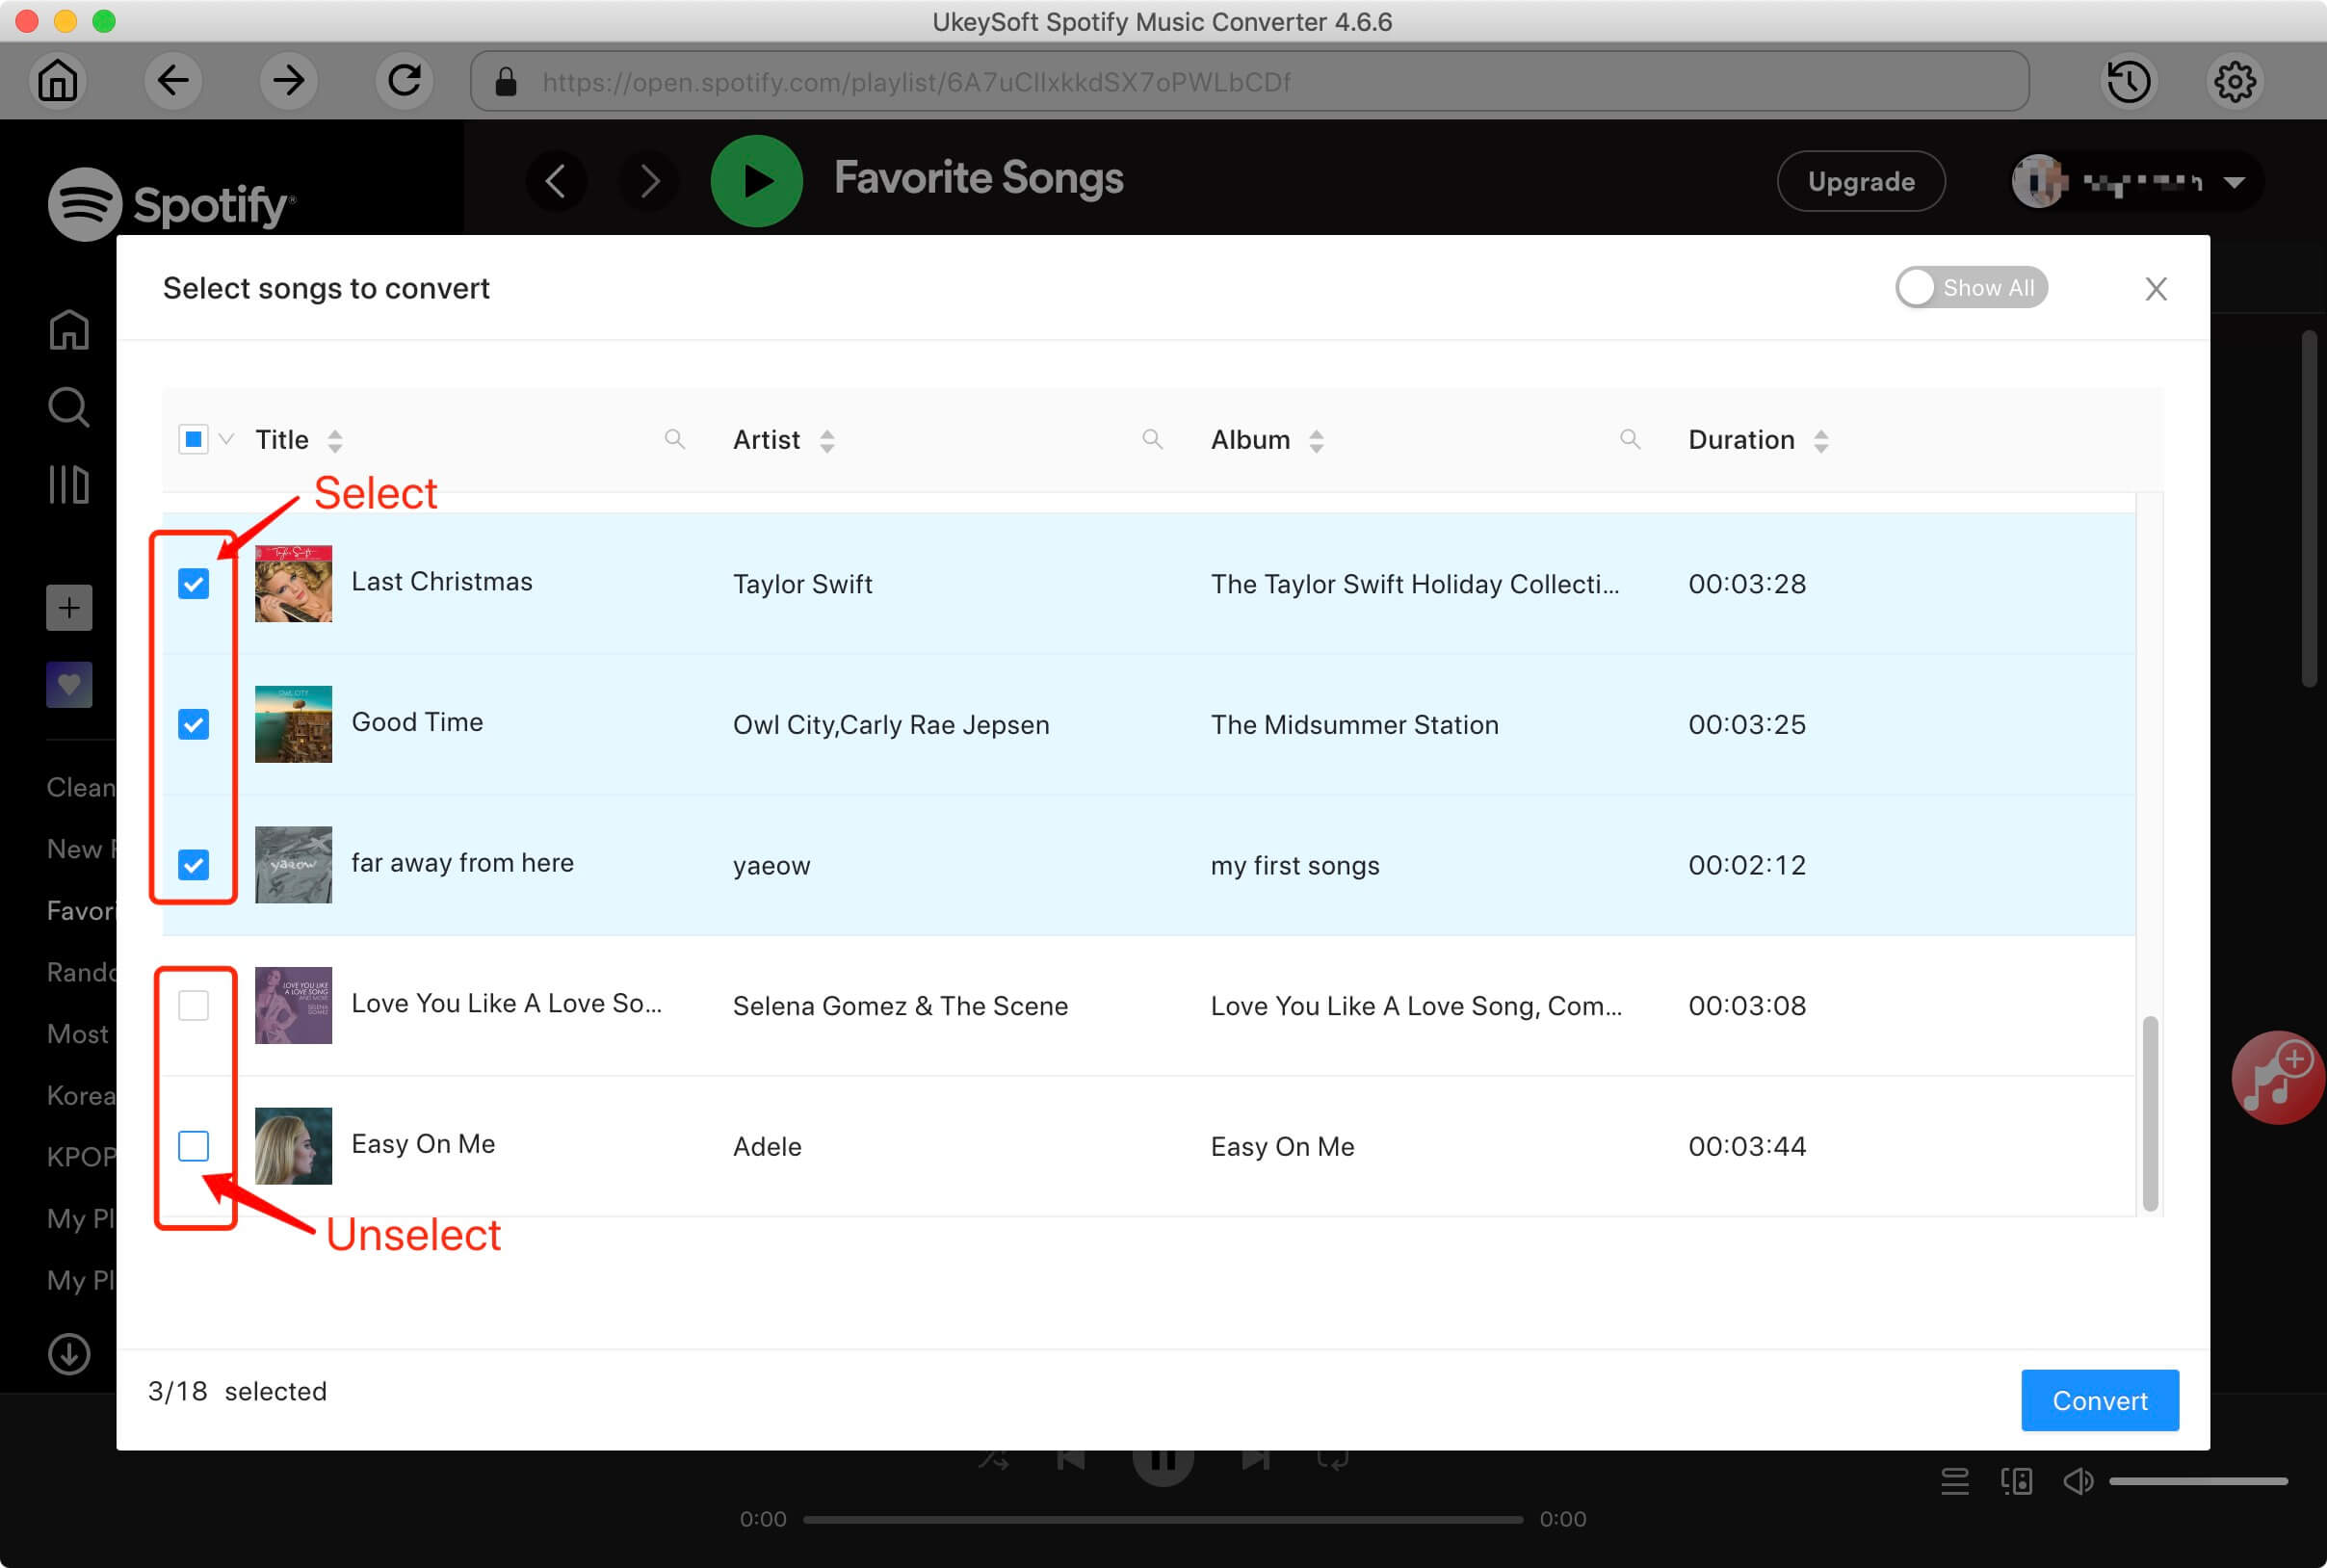 can 4k video downloader download spotify playlist to mp3